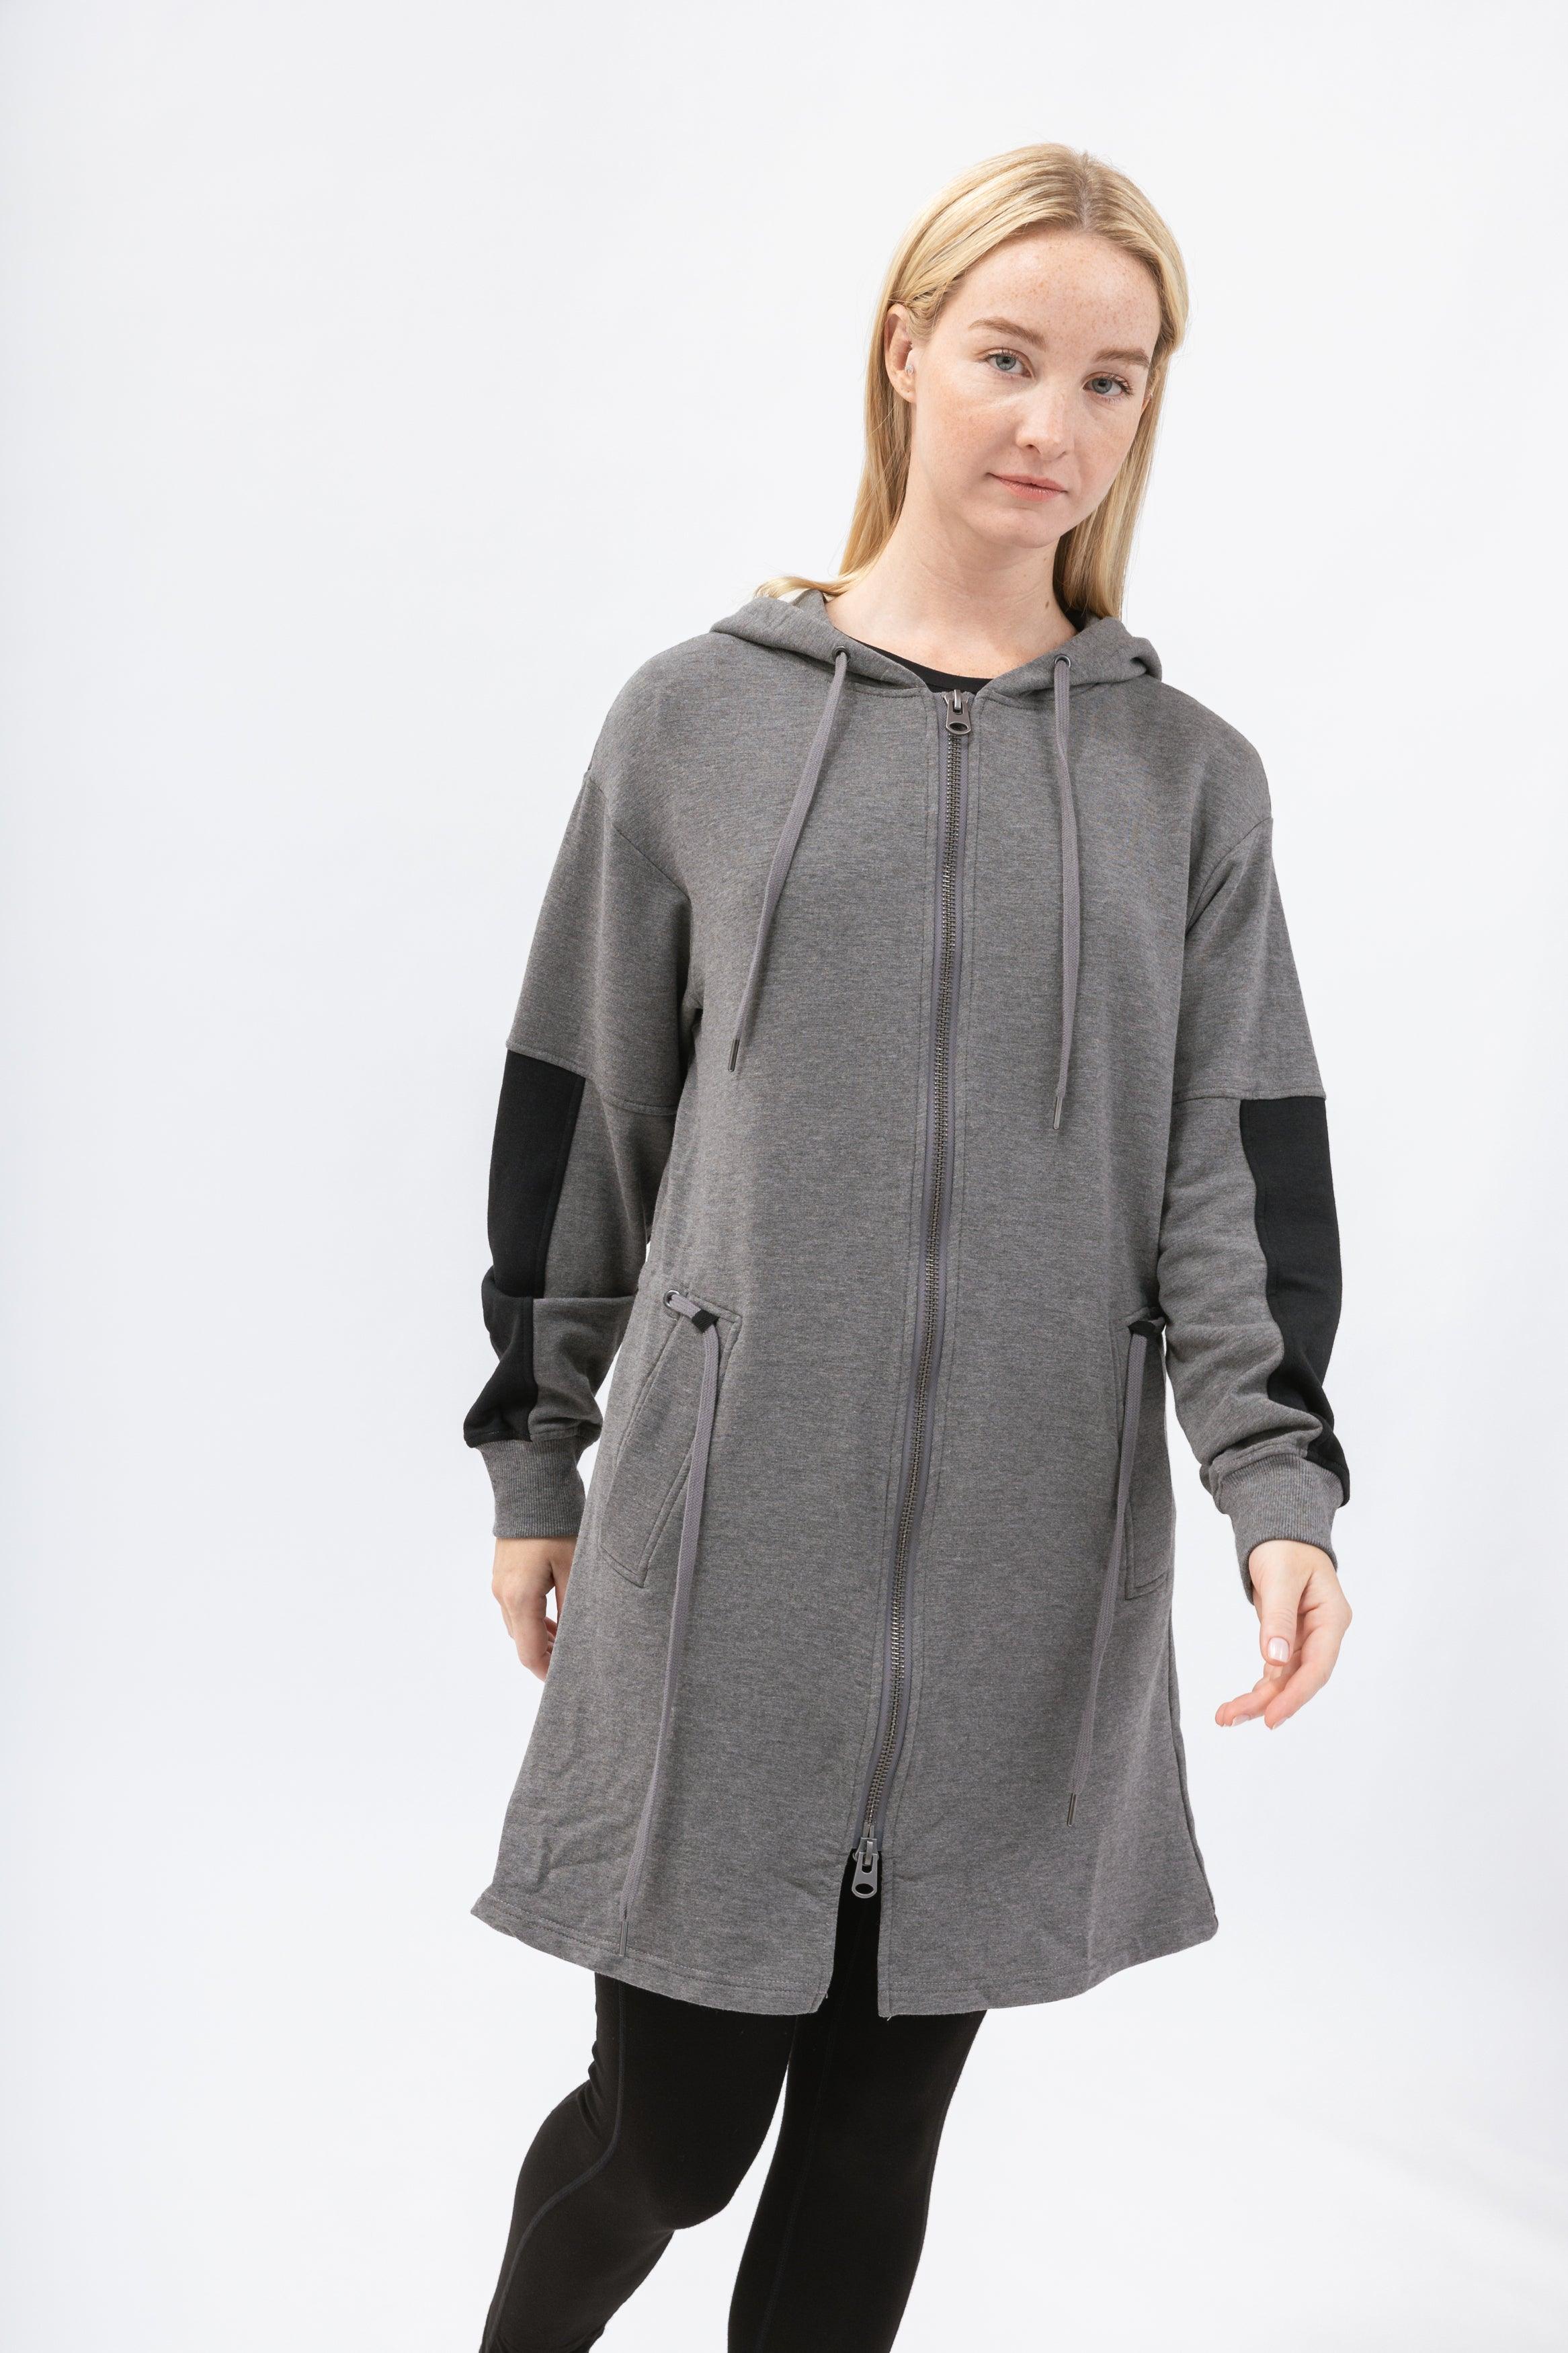 NOT LABELED  Charcoal Gray Melage And Black Brushed-back Fleece  Lightweight Zip Up Hoodie Womens – NotLabeled